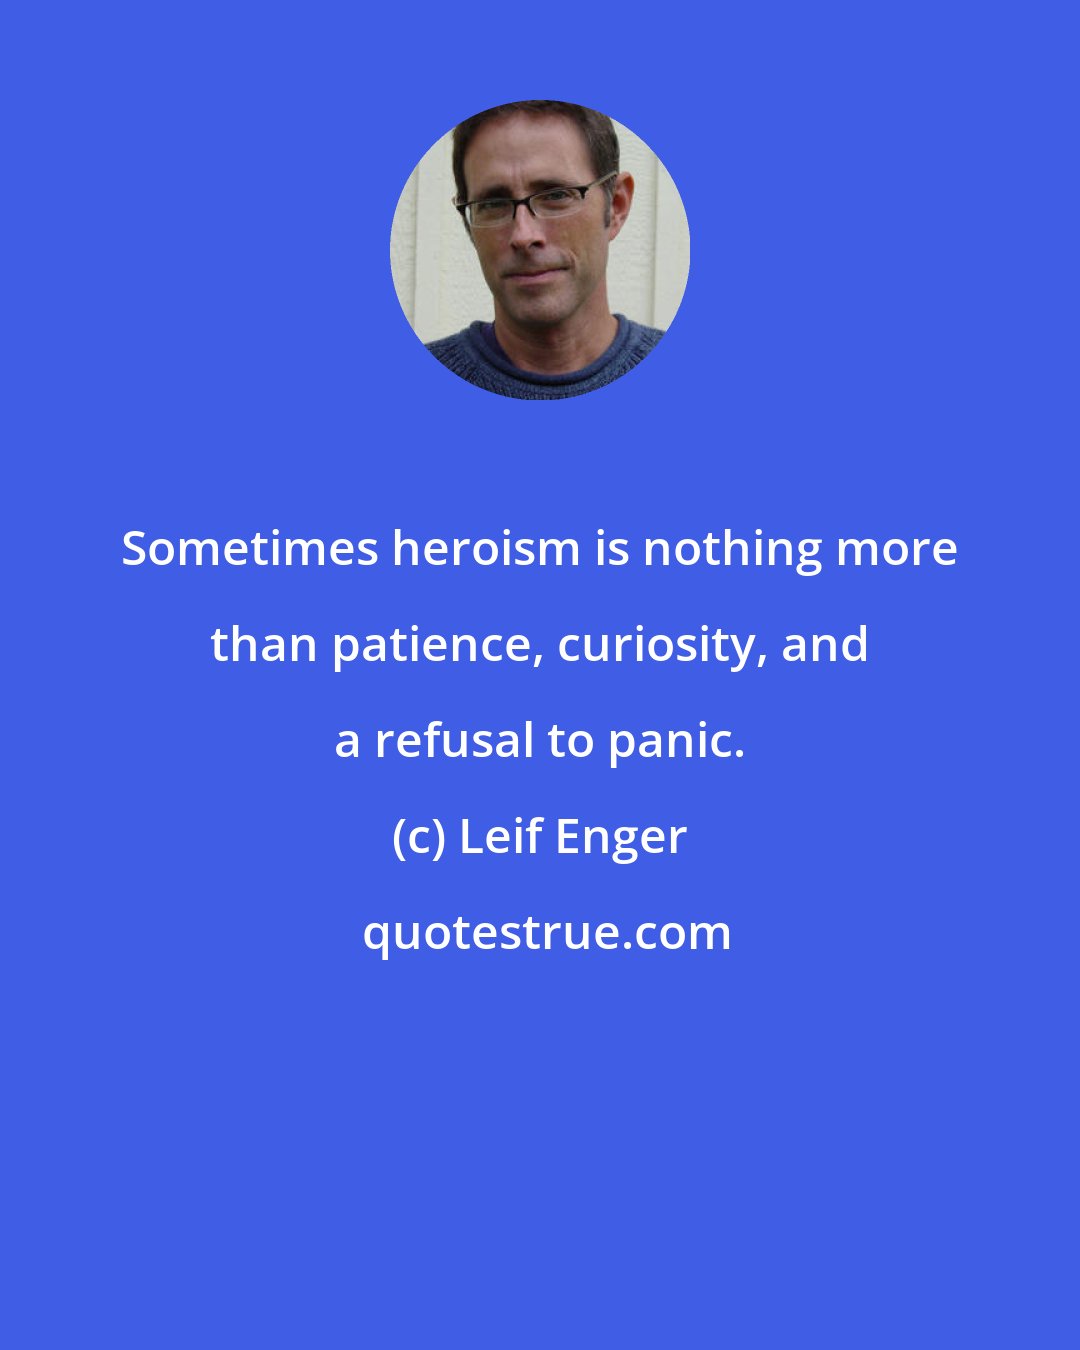 Leif Enger: Sometimes heroism is nothing more than patience, curiosity, and a refusal to panic.